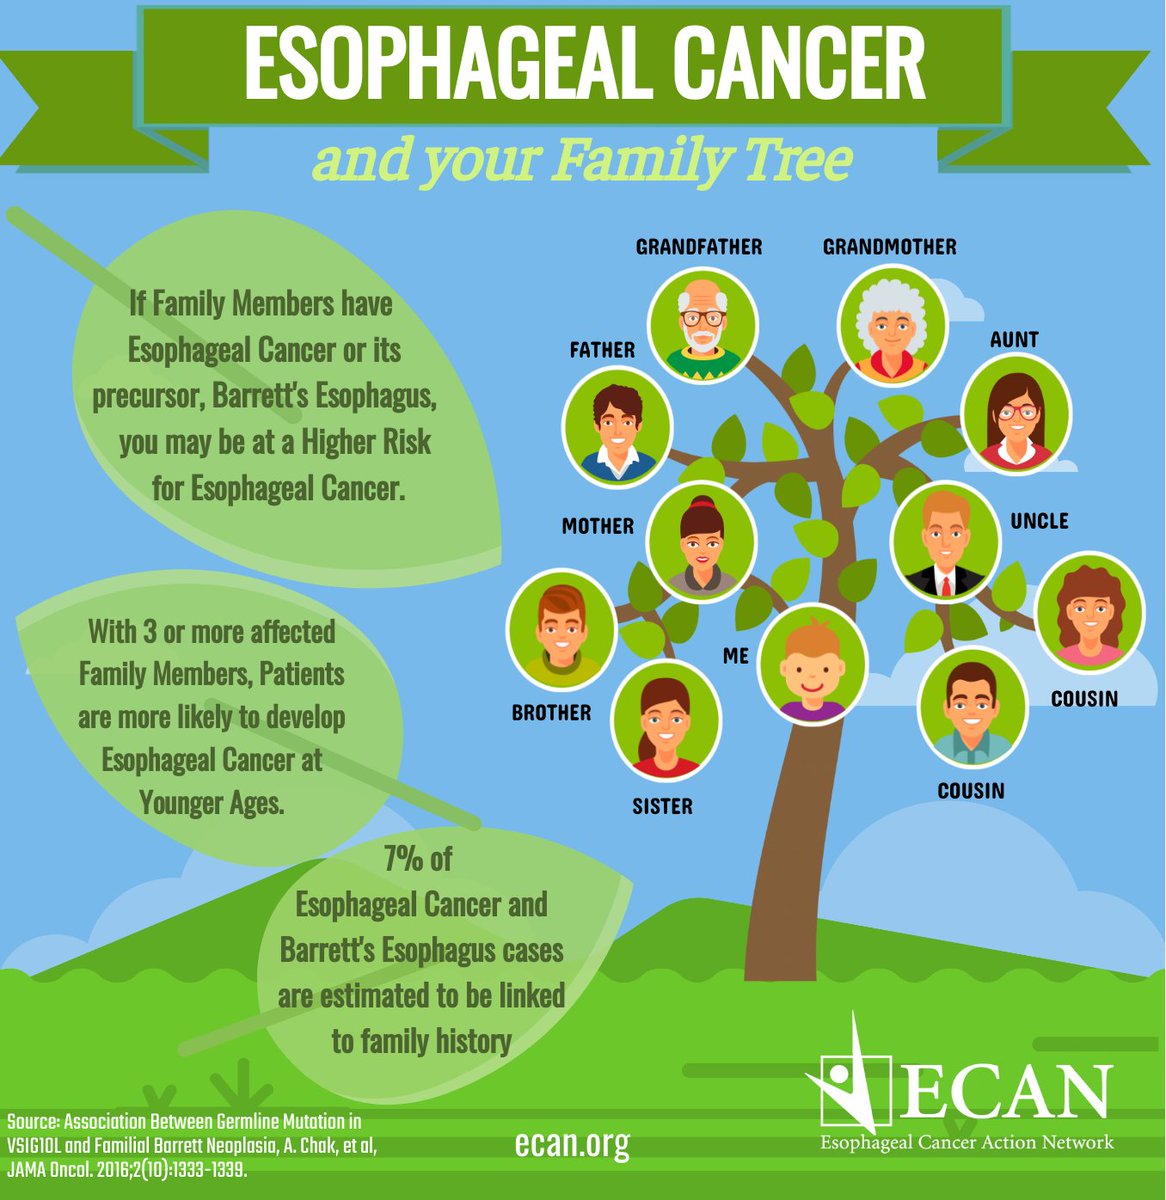 Family history of Esophageal Cancer or its precursor, Barrett’s Esophagus, may put you at a higher risk for Esophageal Cancer. With 3+ affected family members, patients are more likely to develop EC at younger ages. Visit Get-Checked.org to learn more✅ #ECAM2024